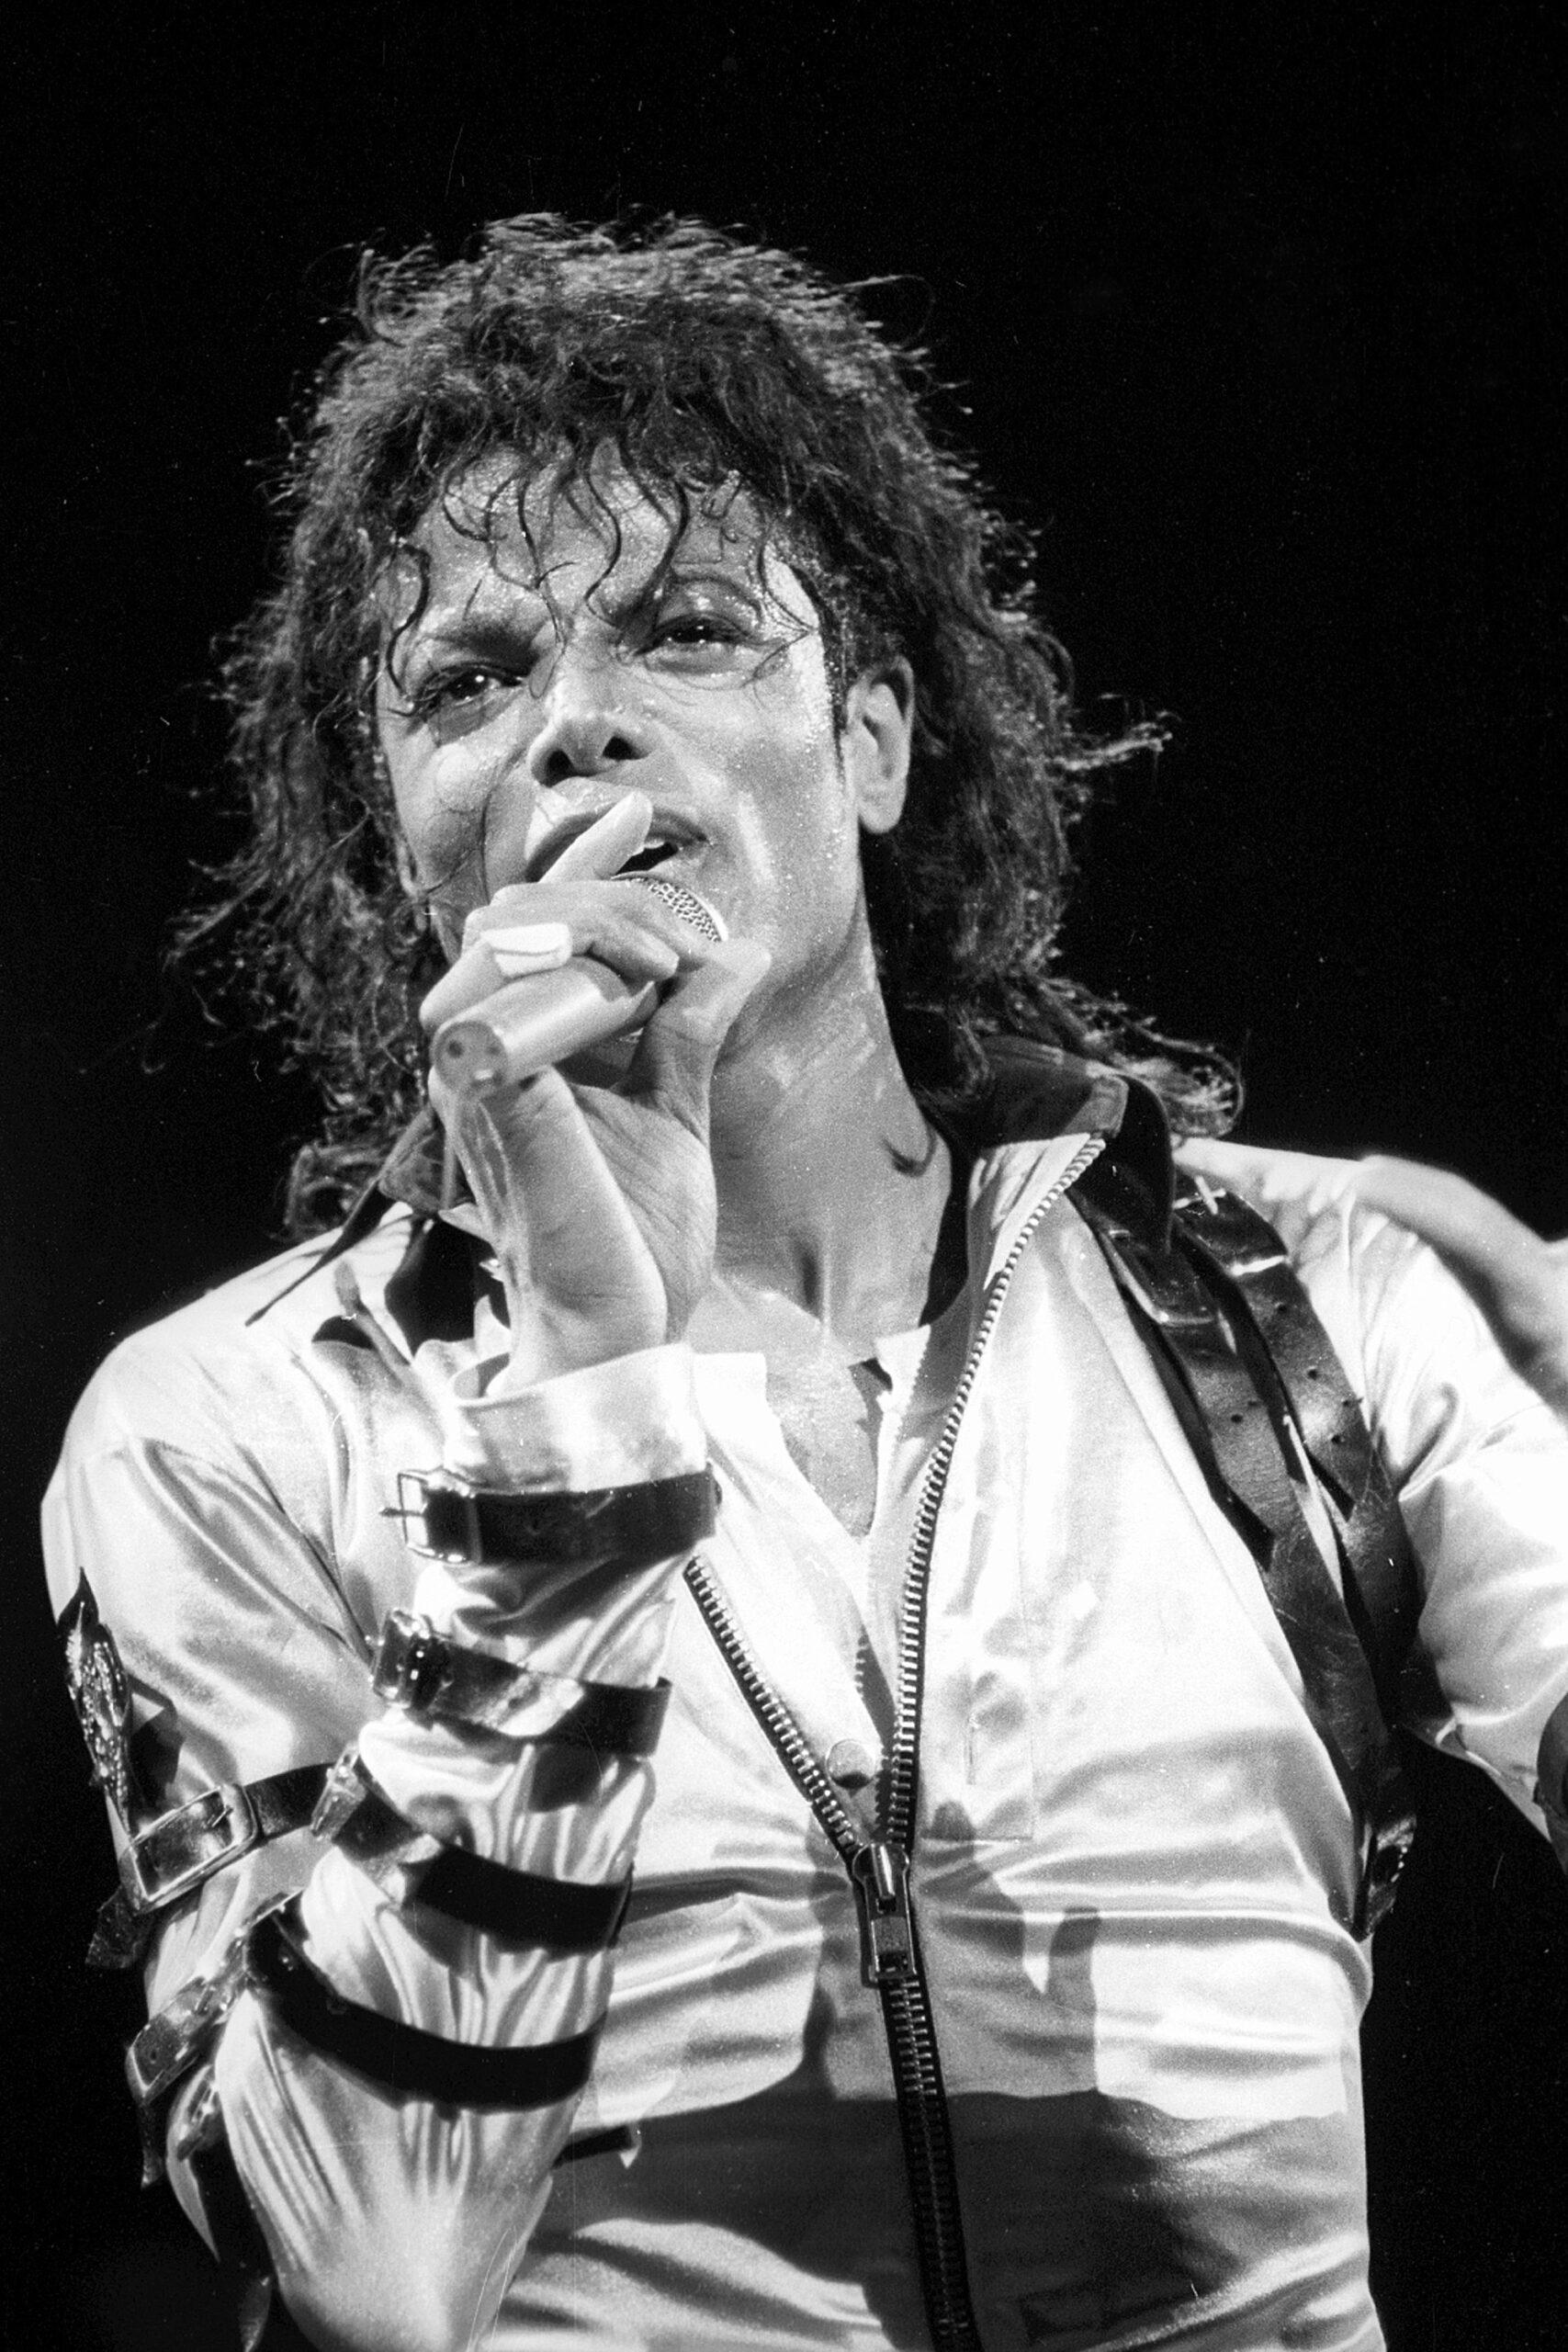 A photo of Micael Jackson performing on stage, and he looks amazing.